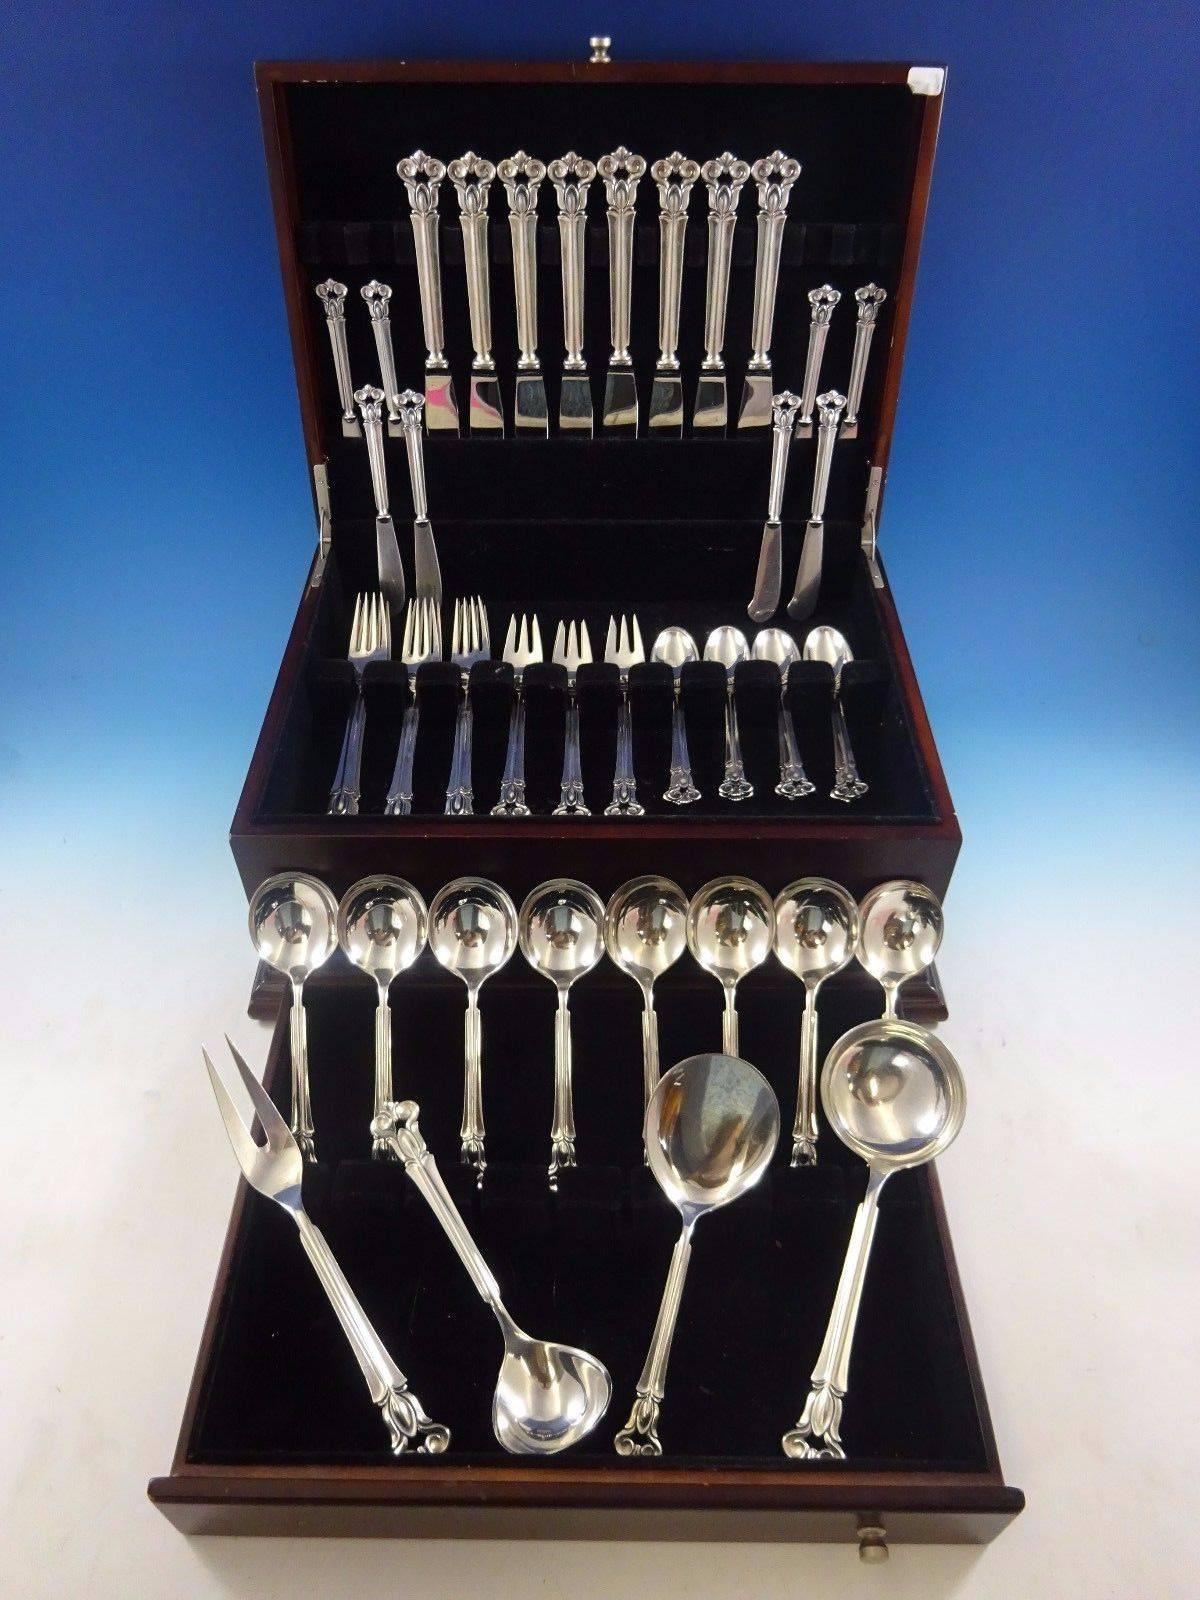 Monica by Cohr sterling silver dinner size flatware set of 52 pieces. This set includes:

Measures:
Eight dinner knives, 8 3/4